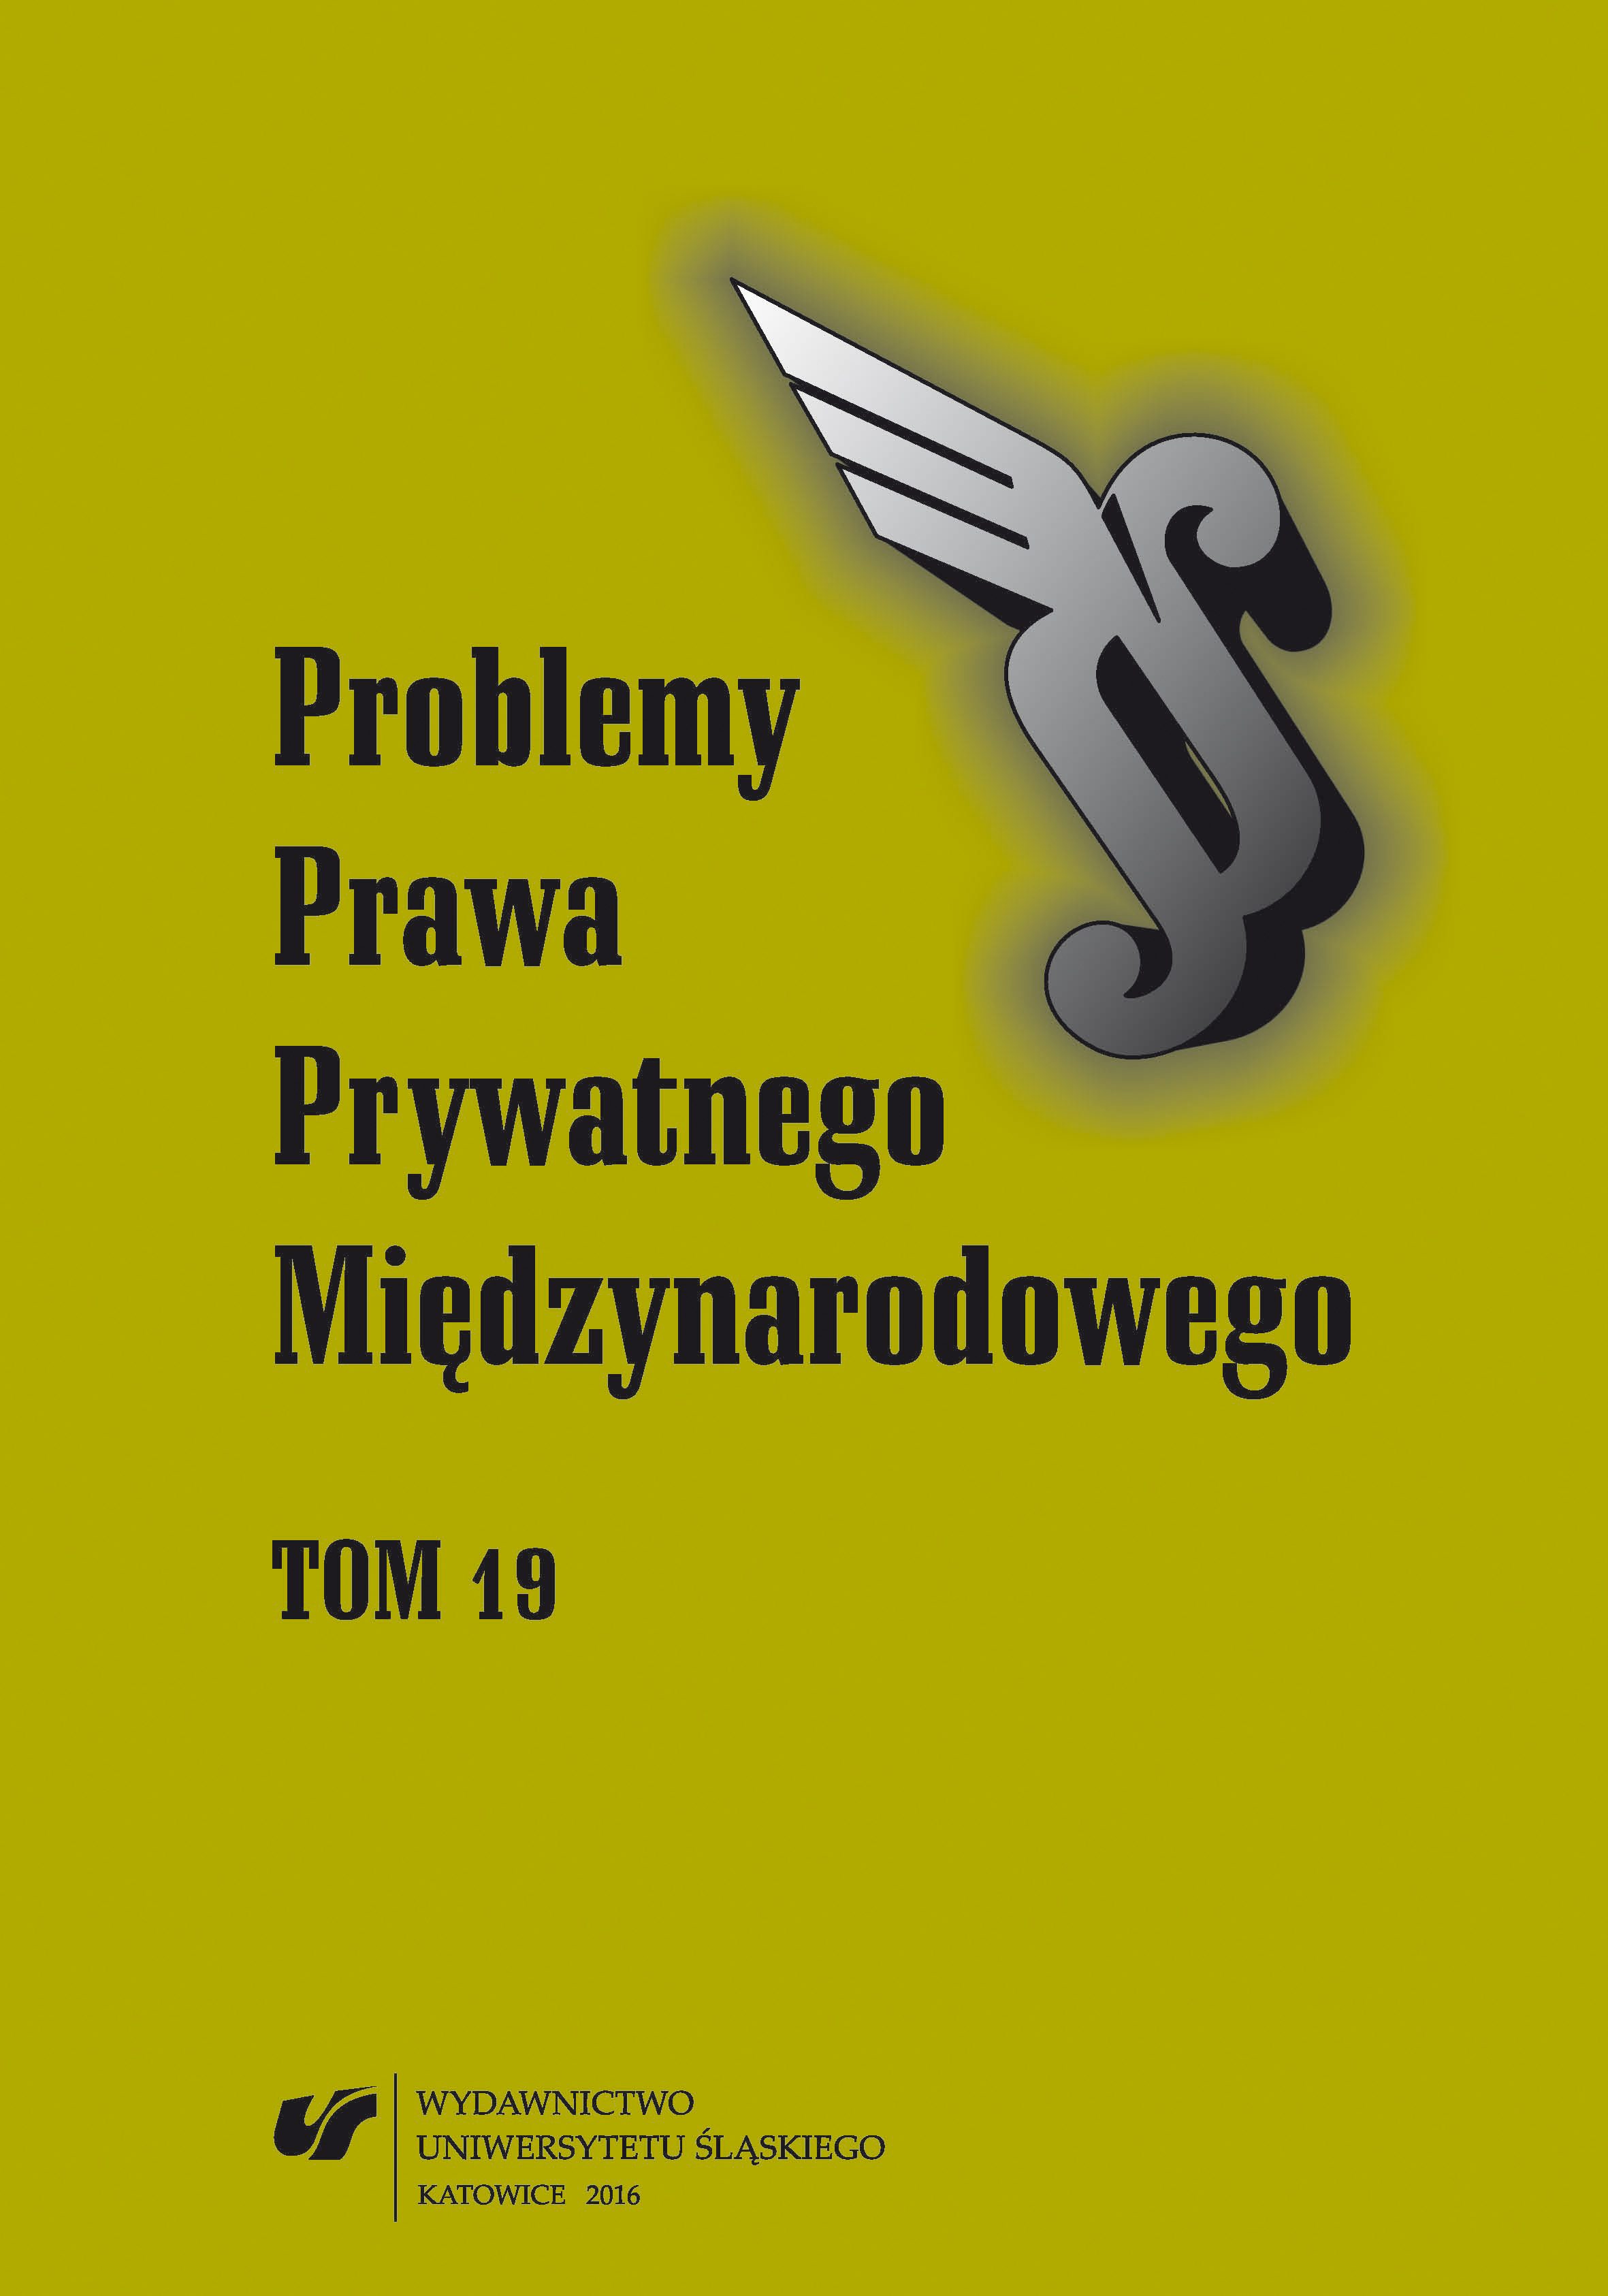 Material effects of a legacy ‘by vindication’ in the Regulation (EU) № 650/2012. Preliminary ruling from the Sąd Okręgowy w Gorzowie Wielkopolskim of 8 March 2016, V Cz 664/15 Cover Image